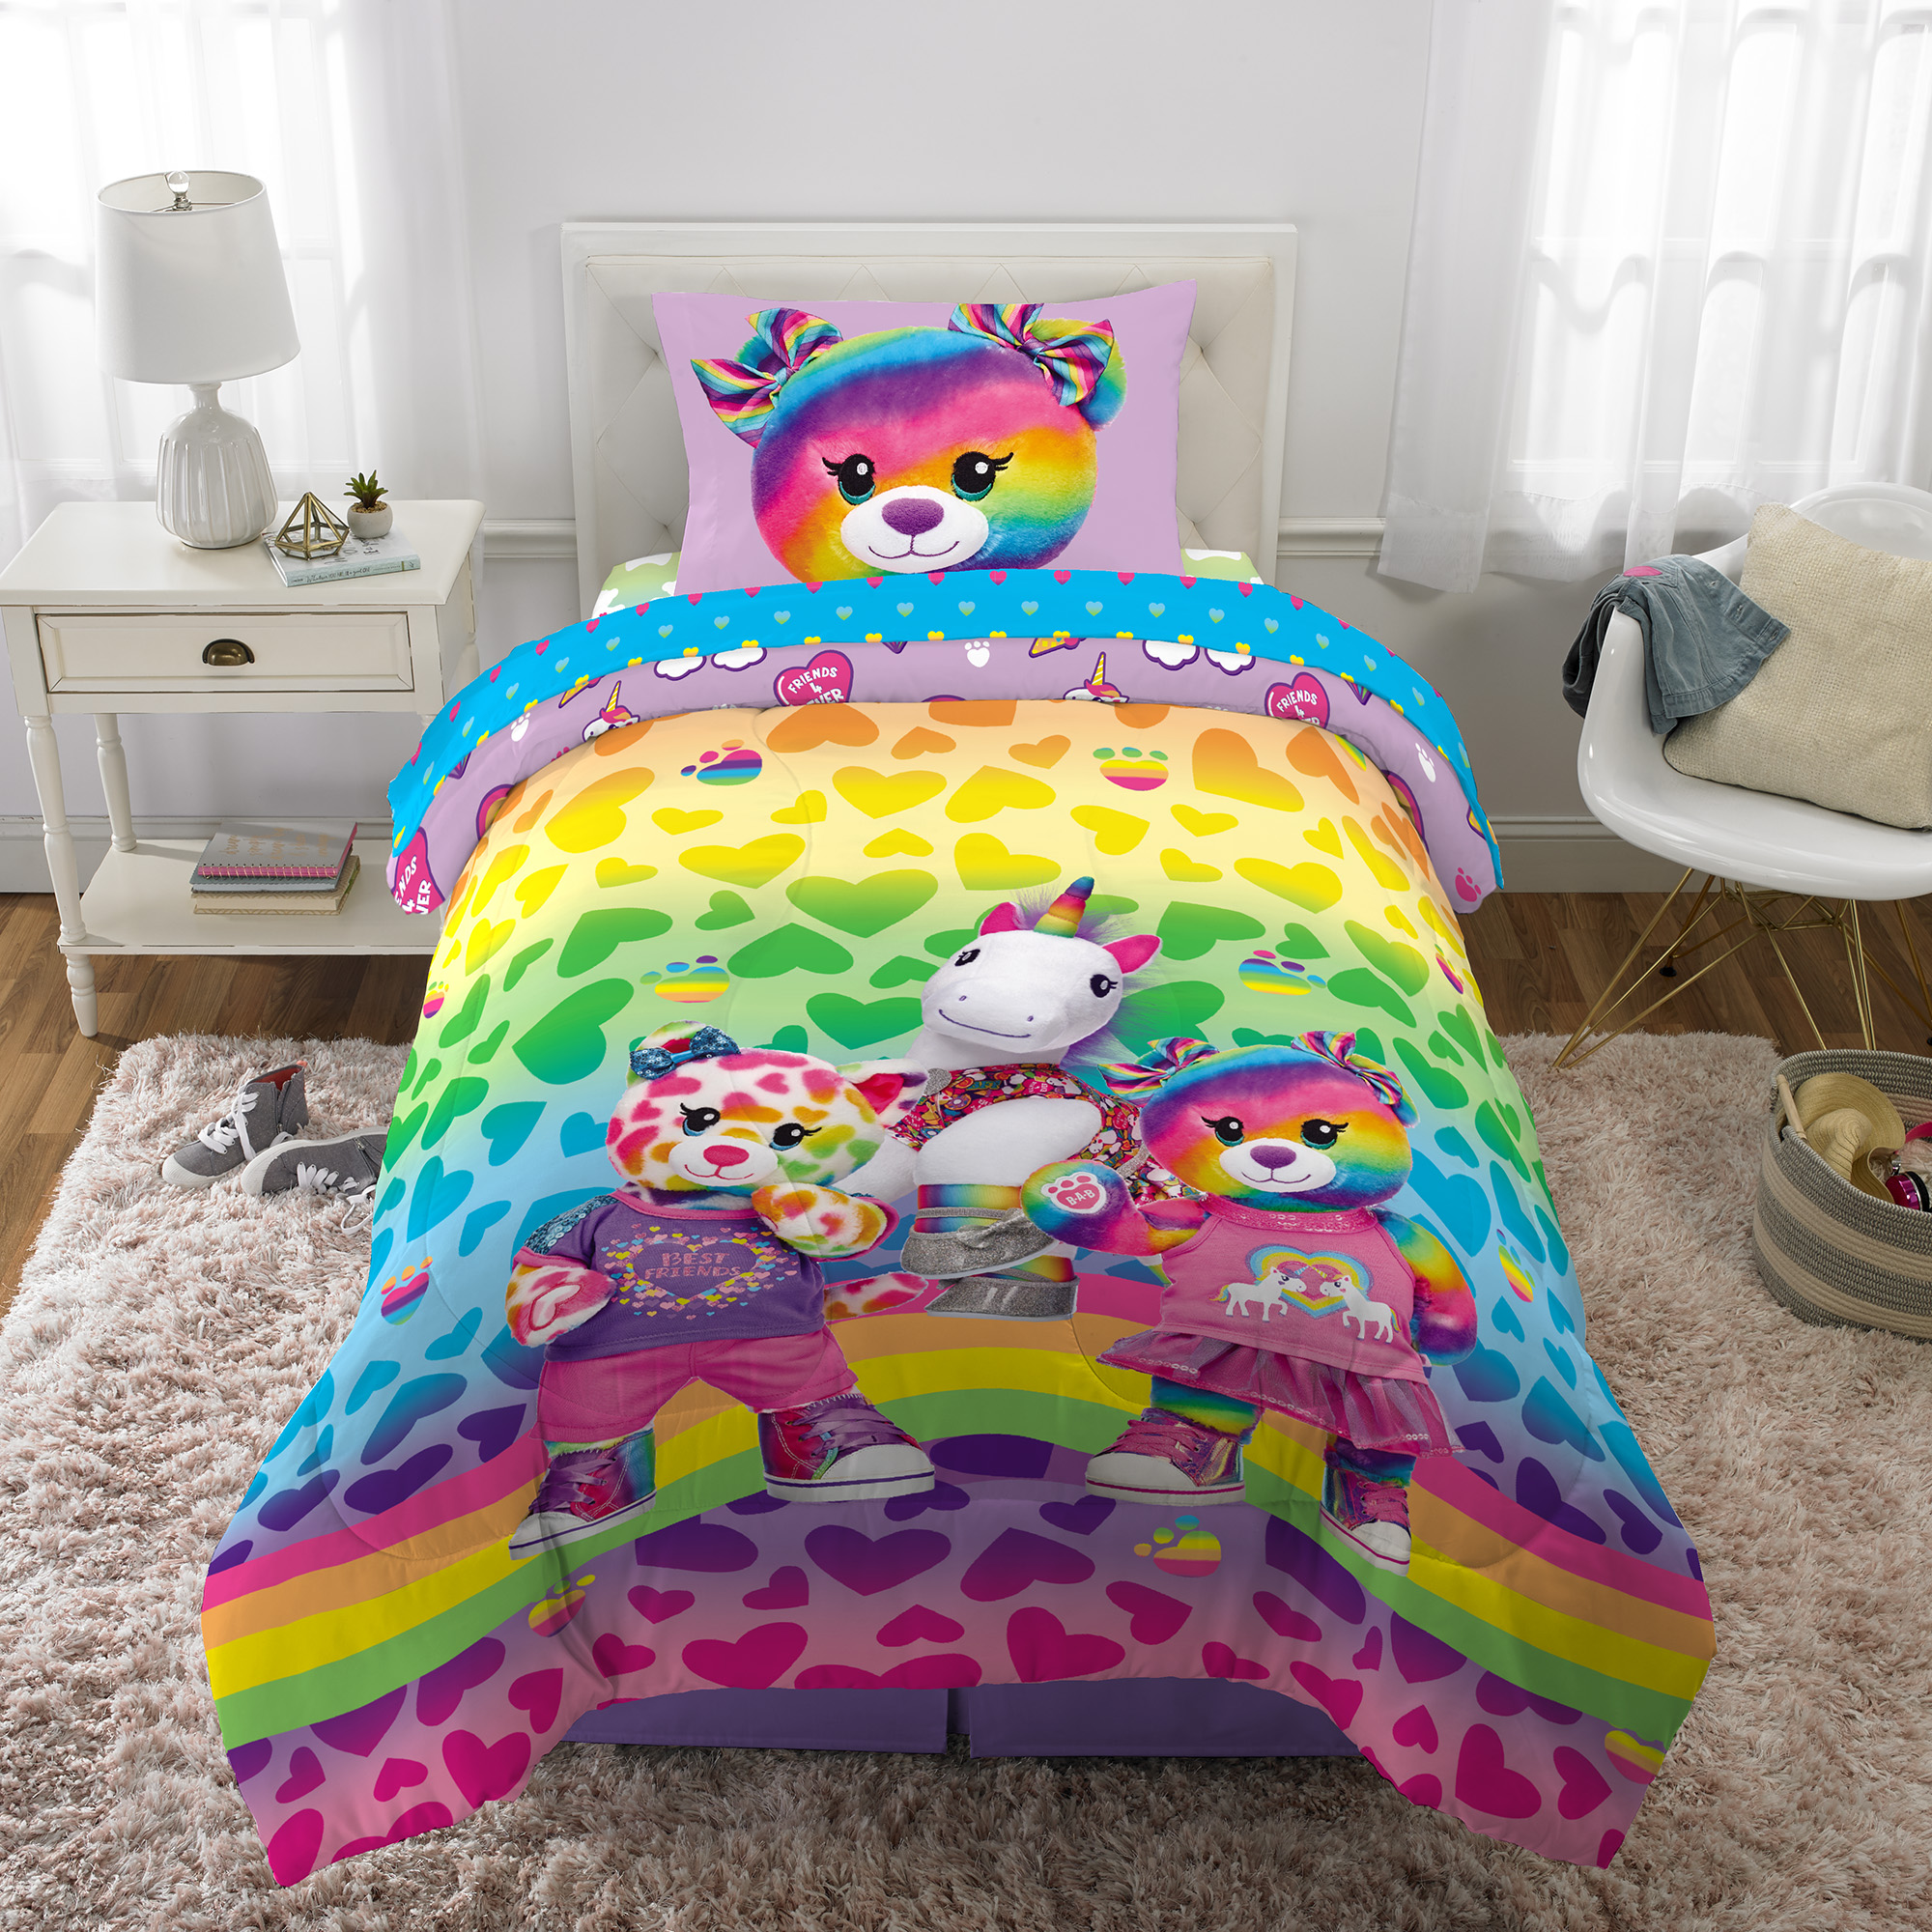 Build-A-Bear Workshop Kids Twin Bed in a Bag, Comforter and Sheets, Multicolor - image 2 of 10